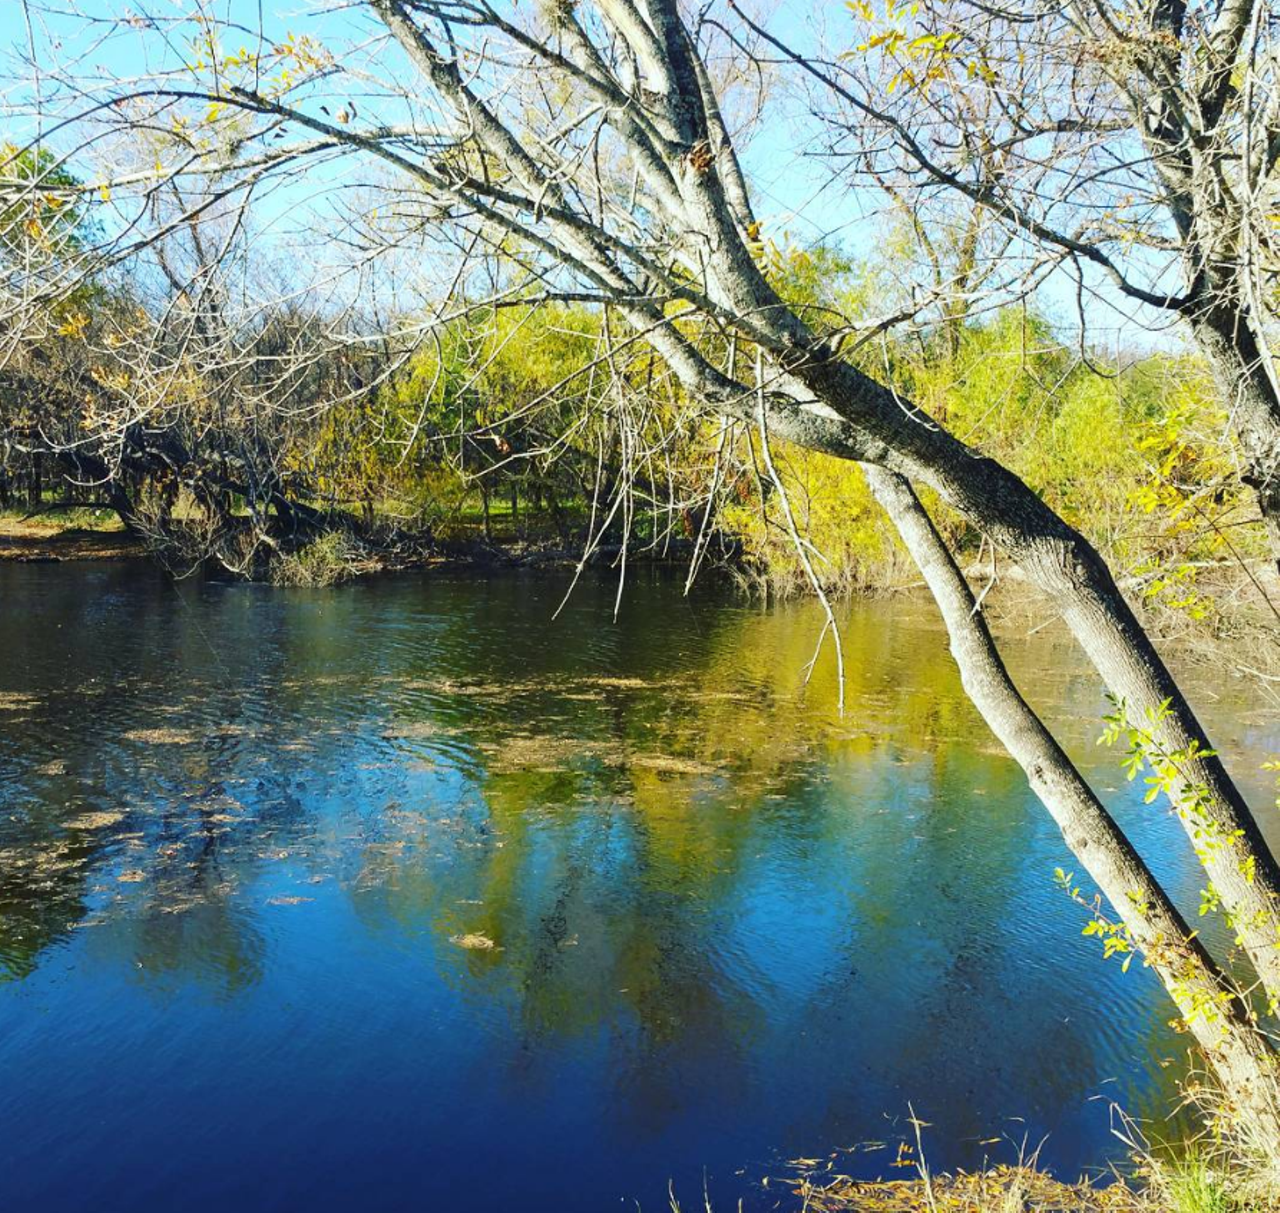 Earl Scott Pond
12160 Babcock Rd, (210) 207-7275
Located in the Greenway a short walk from Rohde Park at the Buddy Calk Trailhead, this rugged spot is the ultimate man v. nature spot with no amenities but lots of catfish, perch and bass.
Instagram/@jessiermitchell